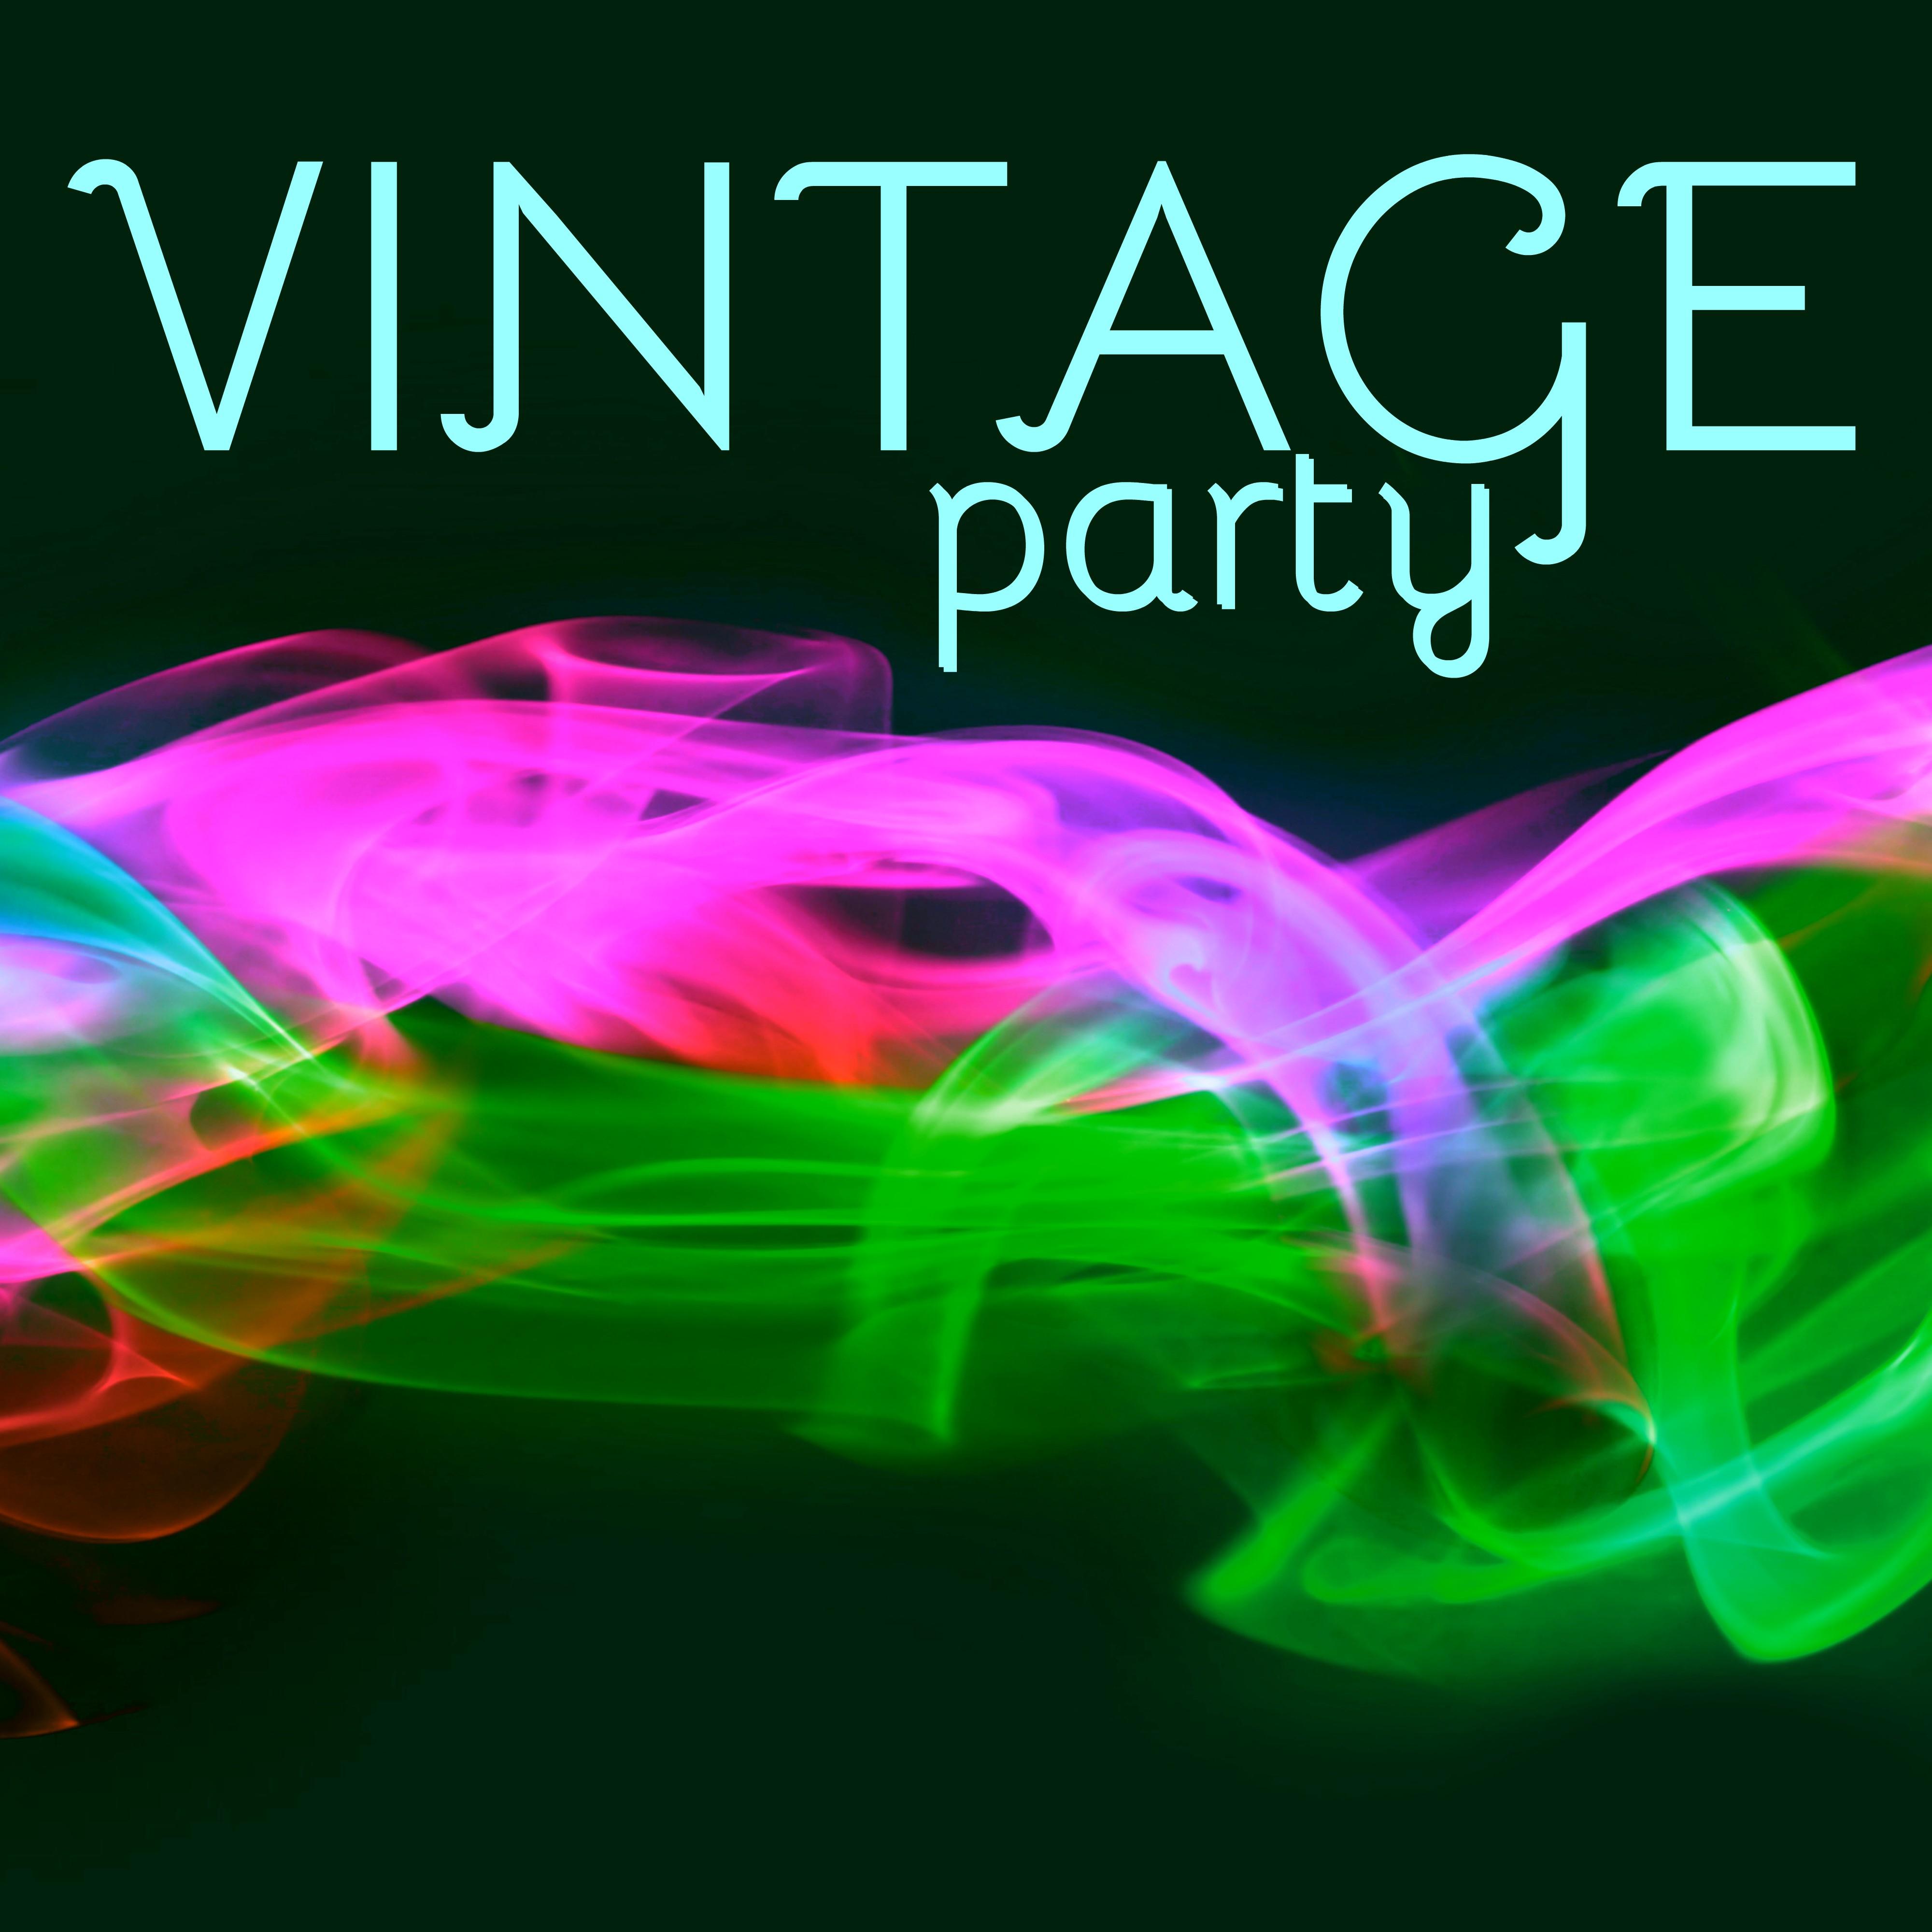 Vintage Party - Jazz Music Guitar, Sax & Piano for Sensual Party Lounge